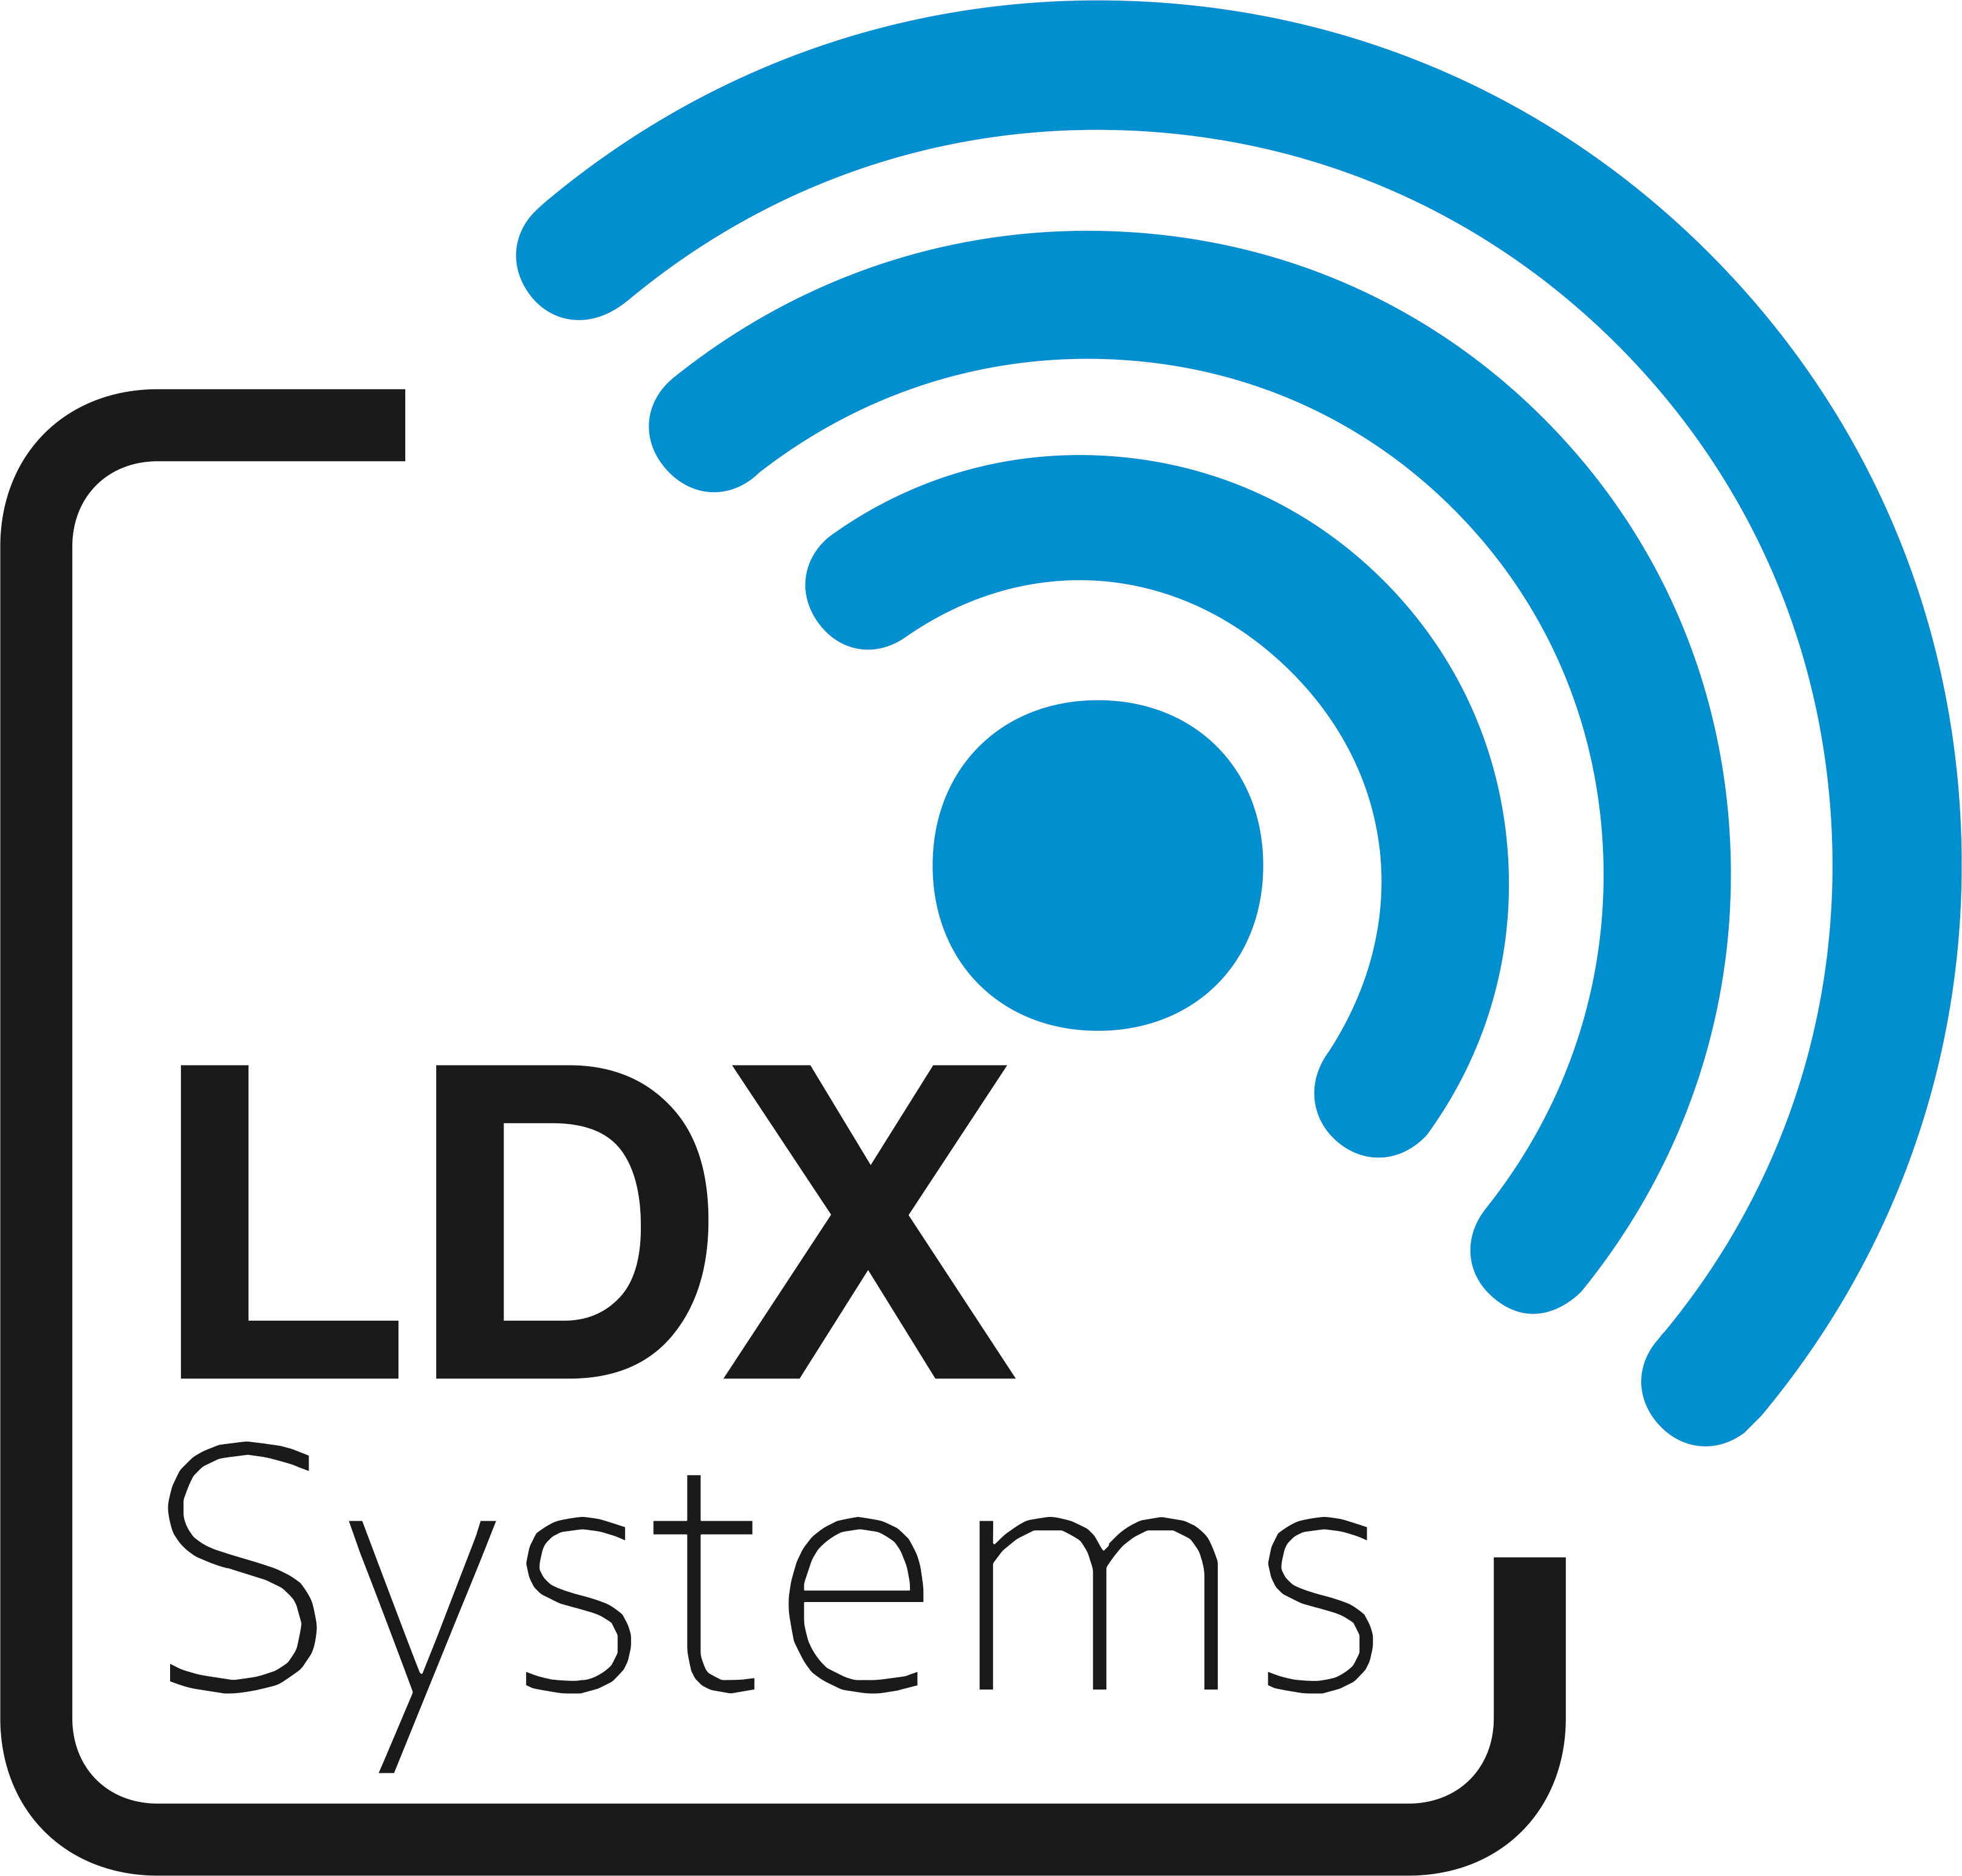 LDX Systems